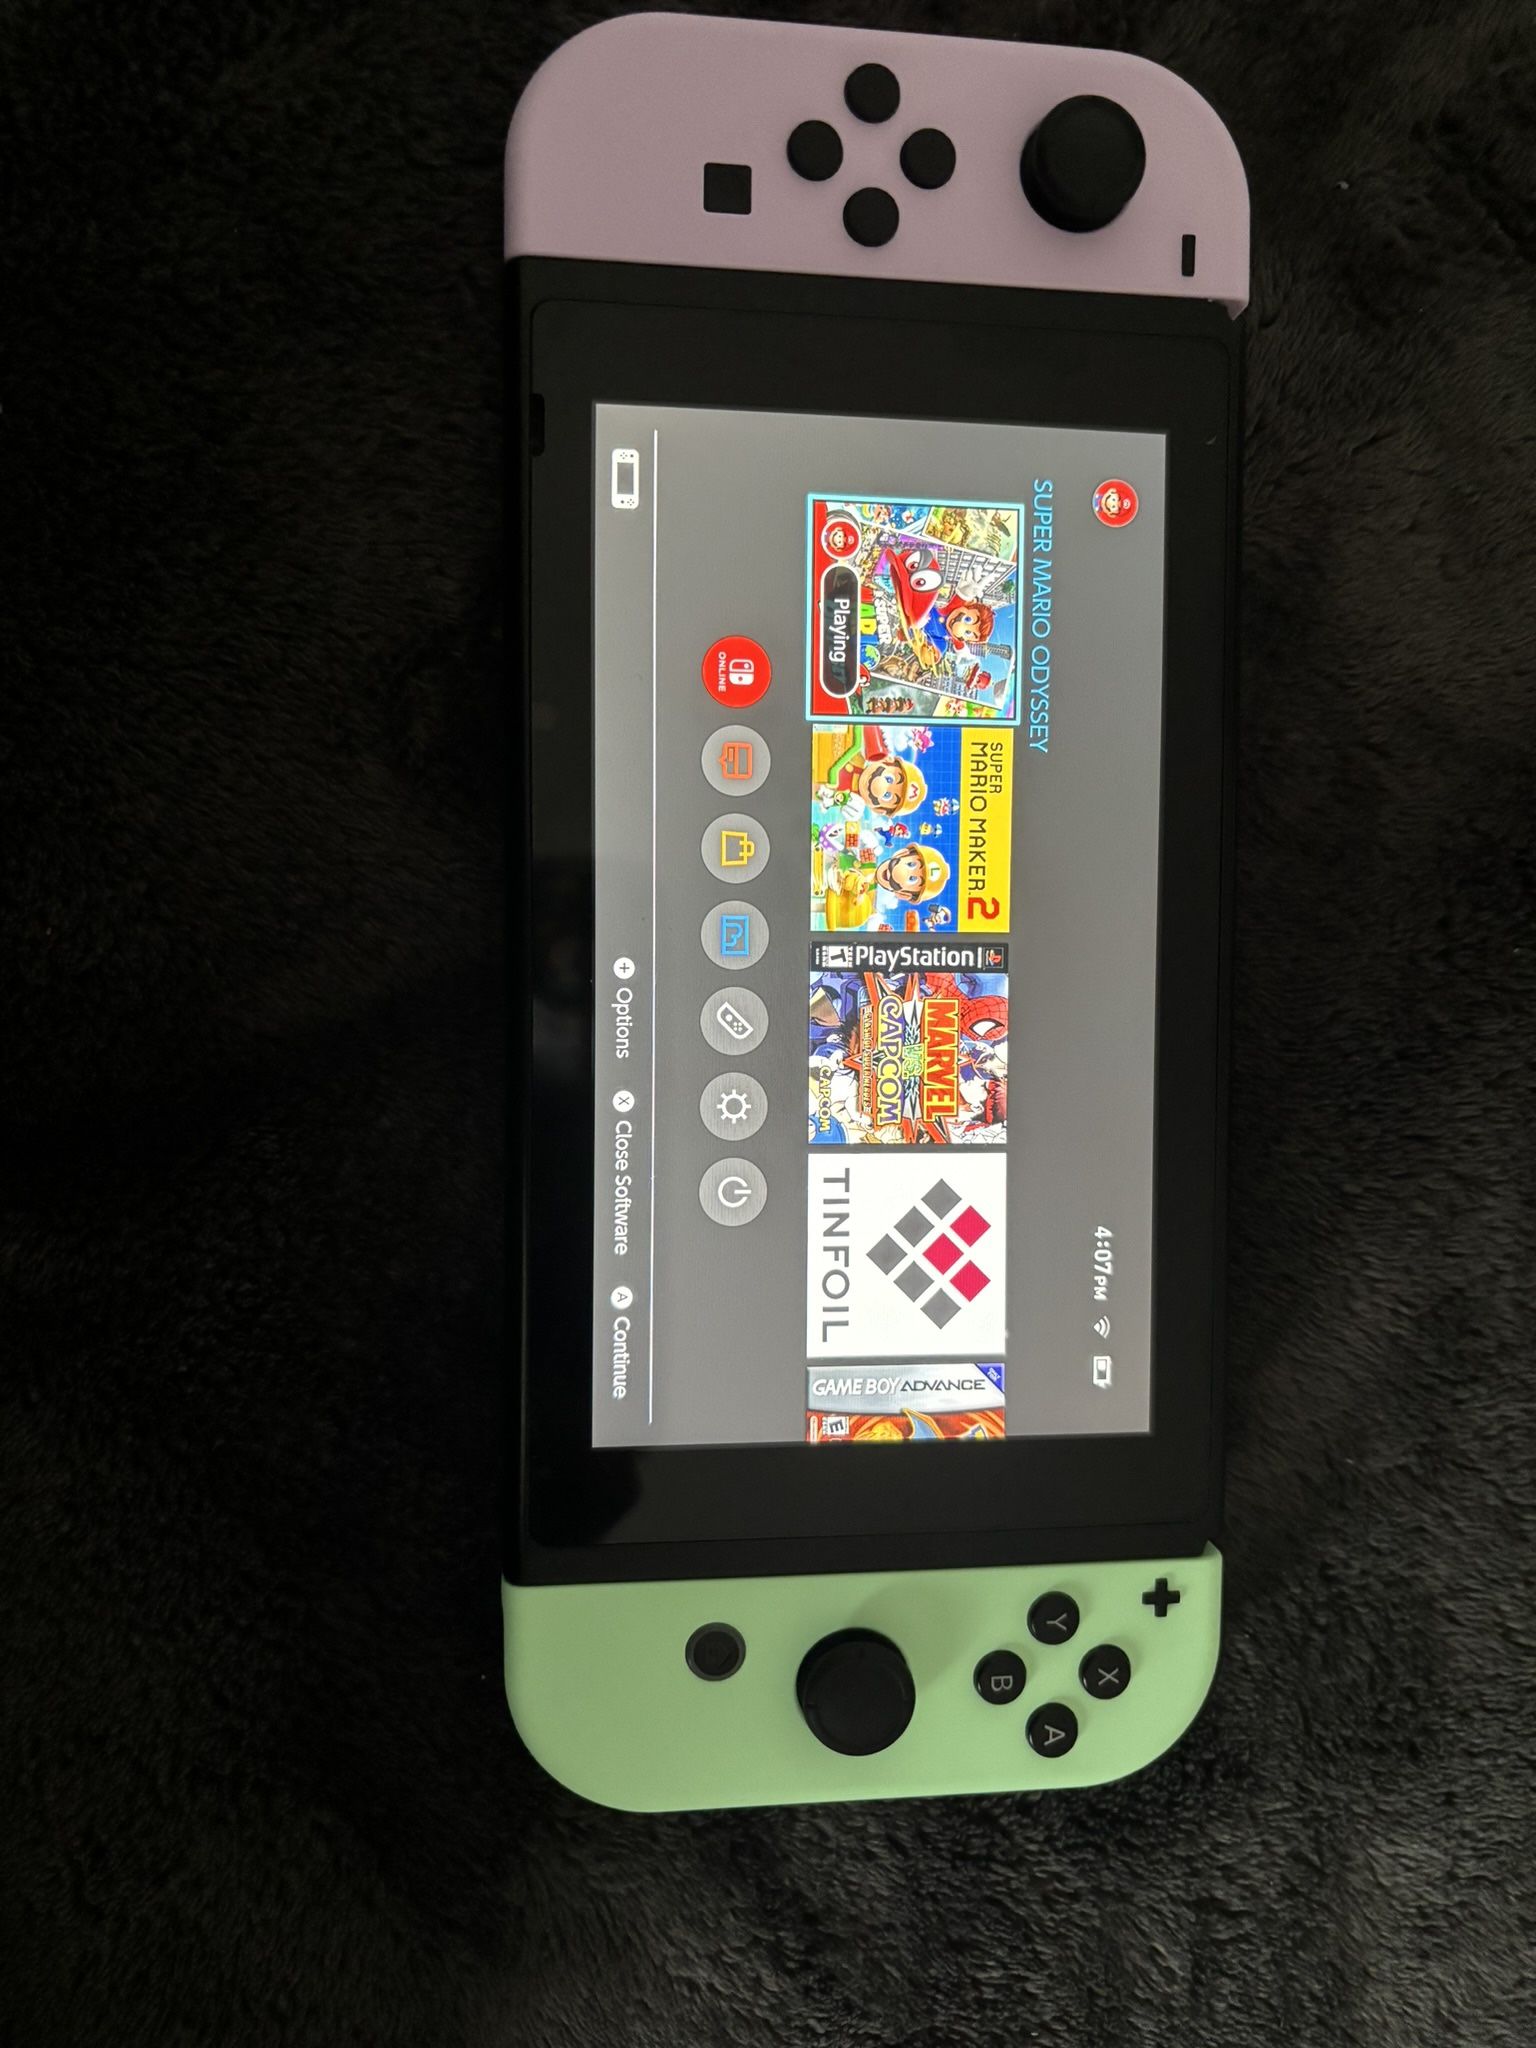 Hacked Nintendo Switch $125 Firm